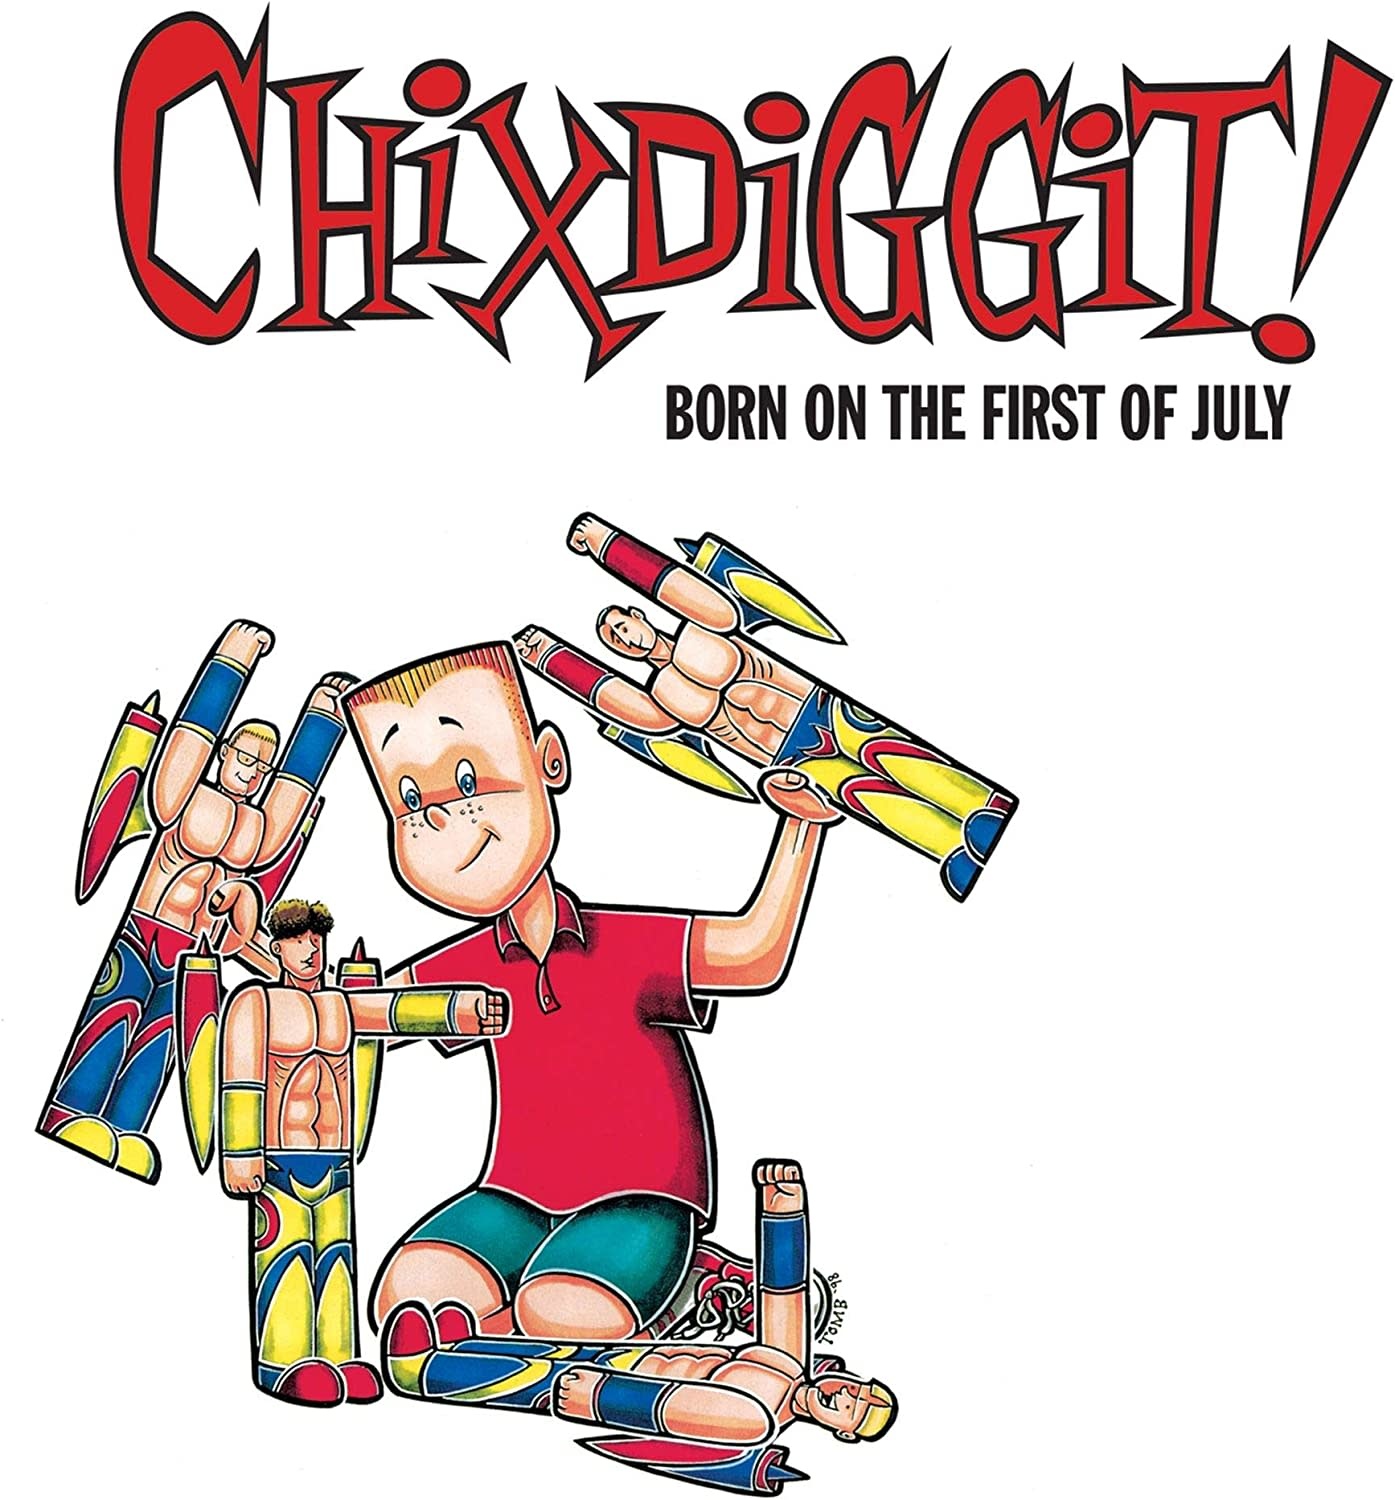 Chixdiggit! - Born On The First Of July